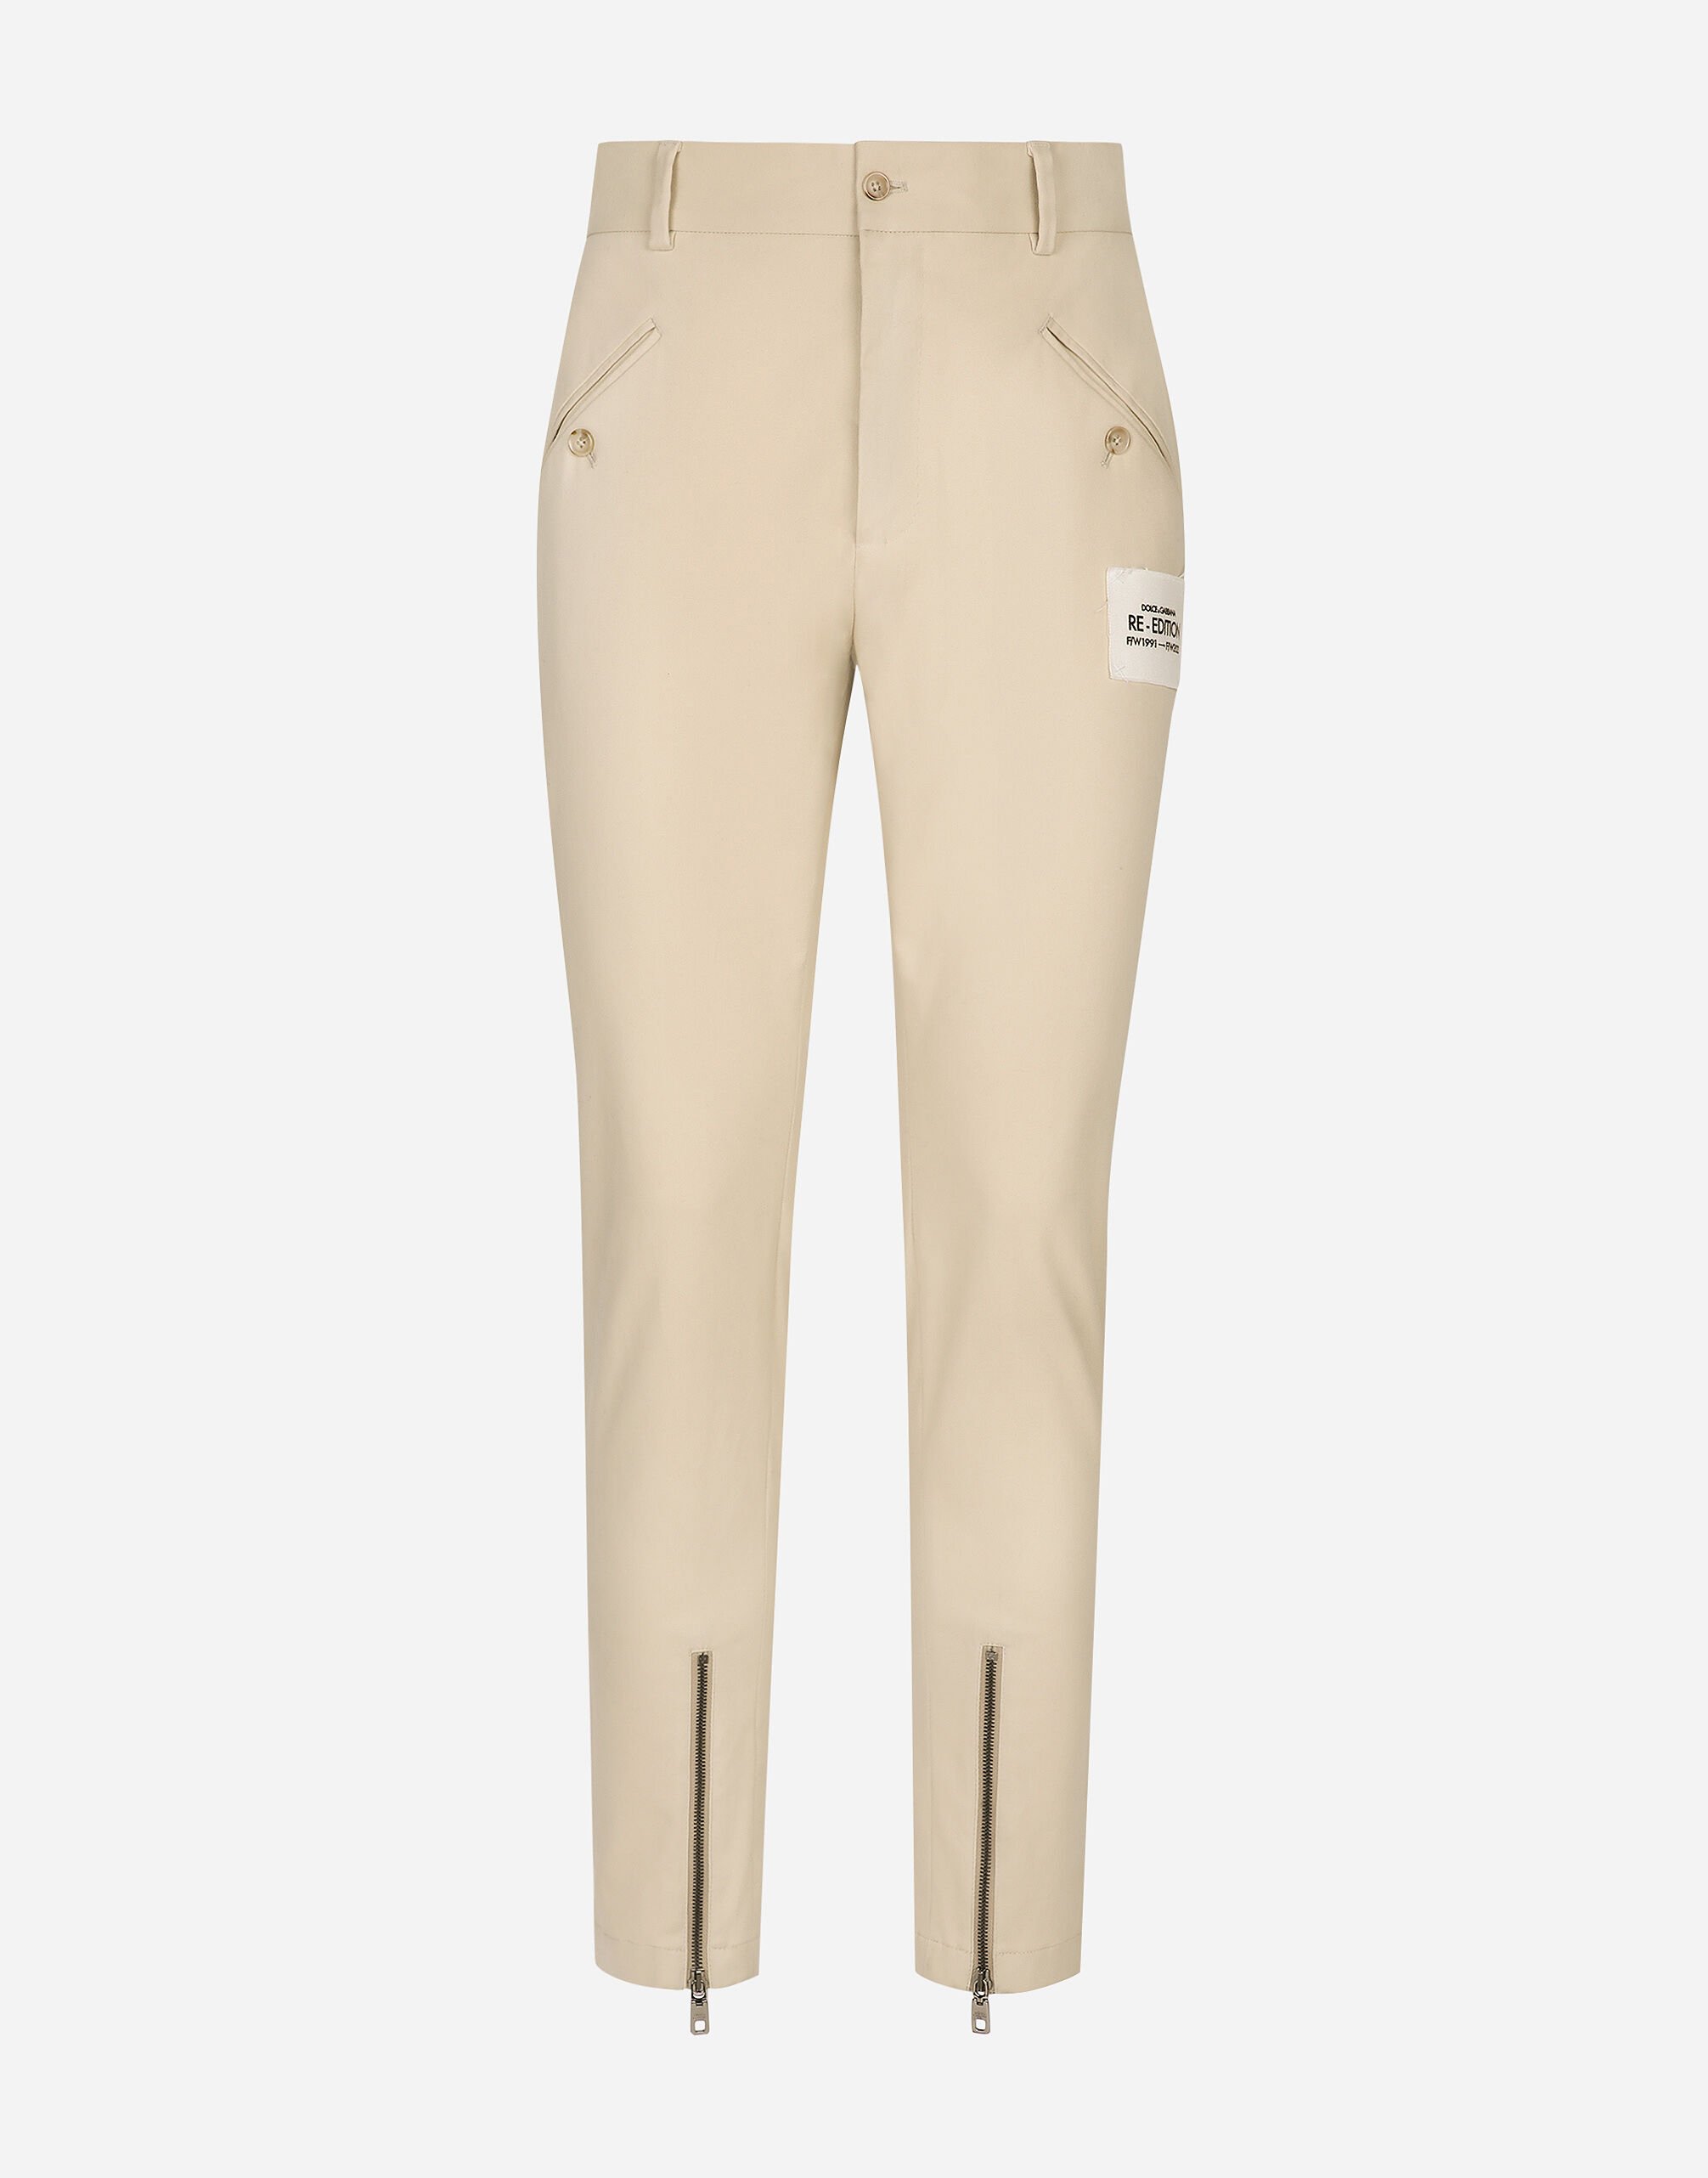 Dolce & Gabbana Stretch cotton pants with Re-Edition label Beige GYZMHTFR20N